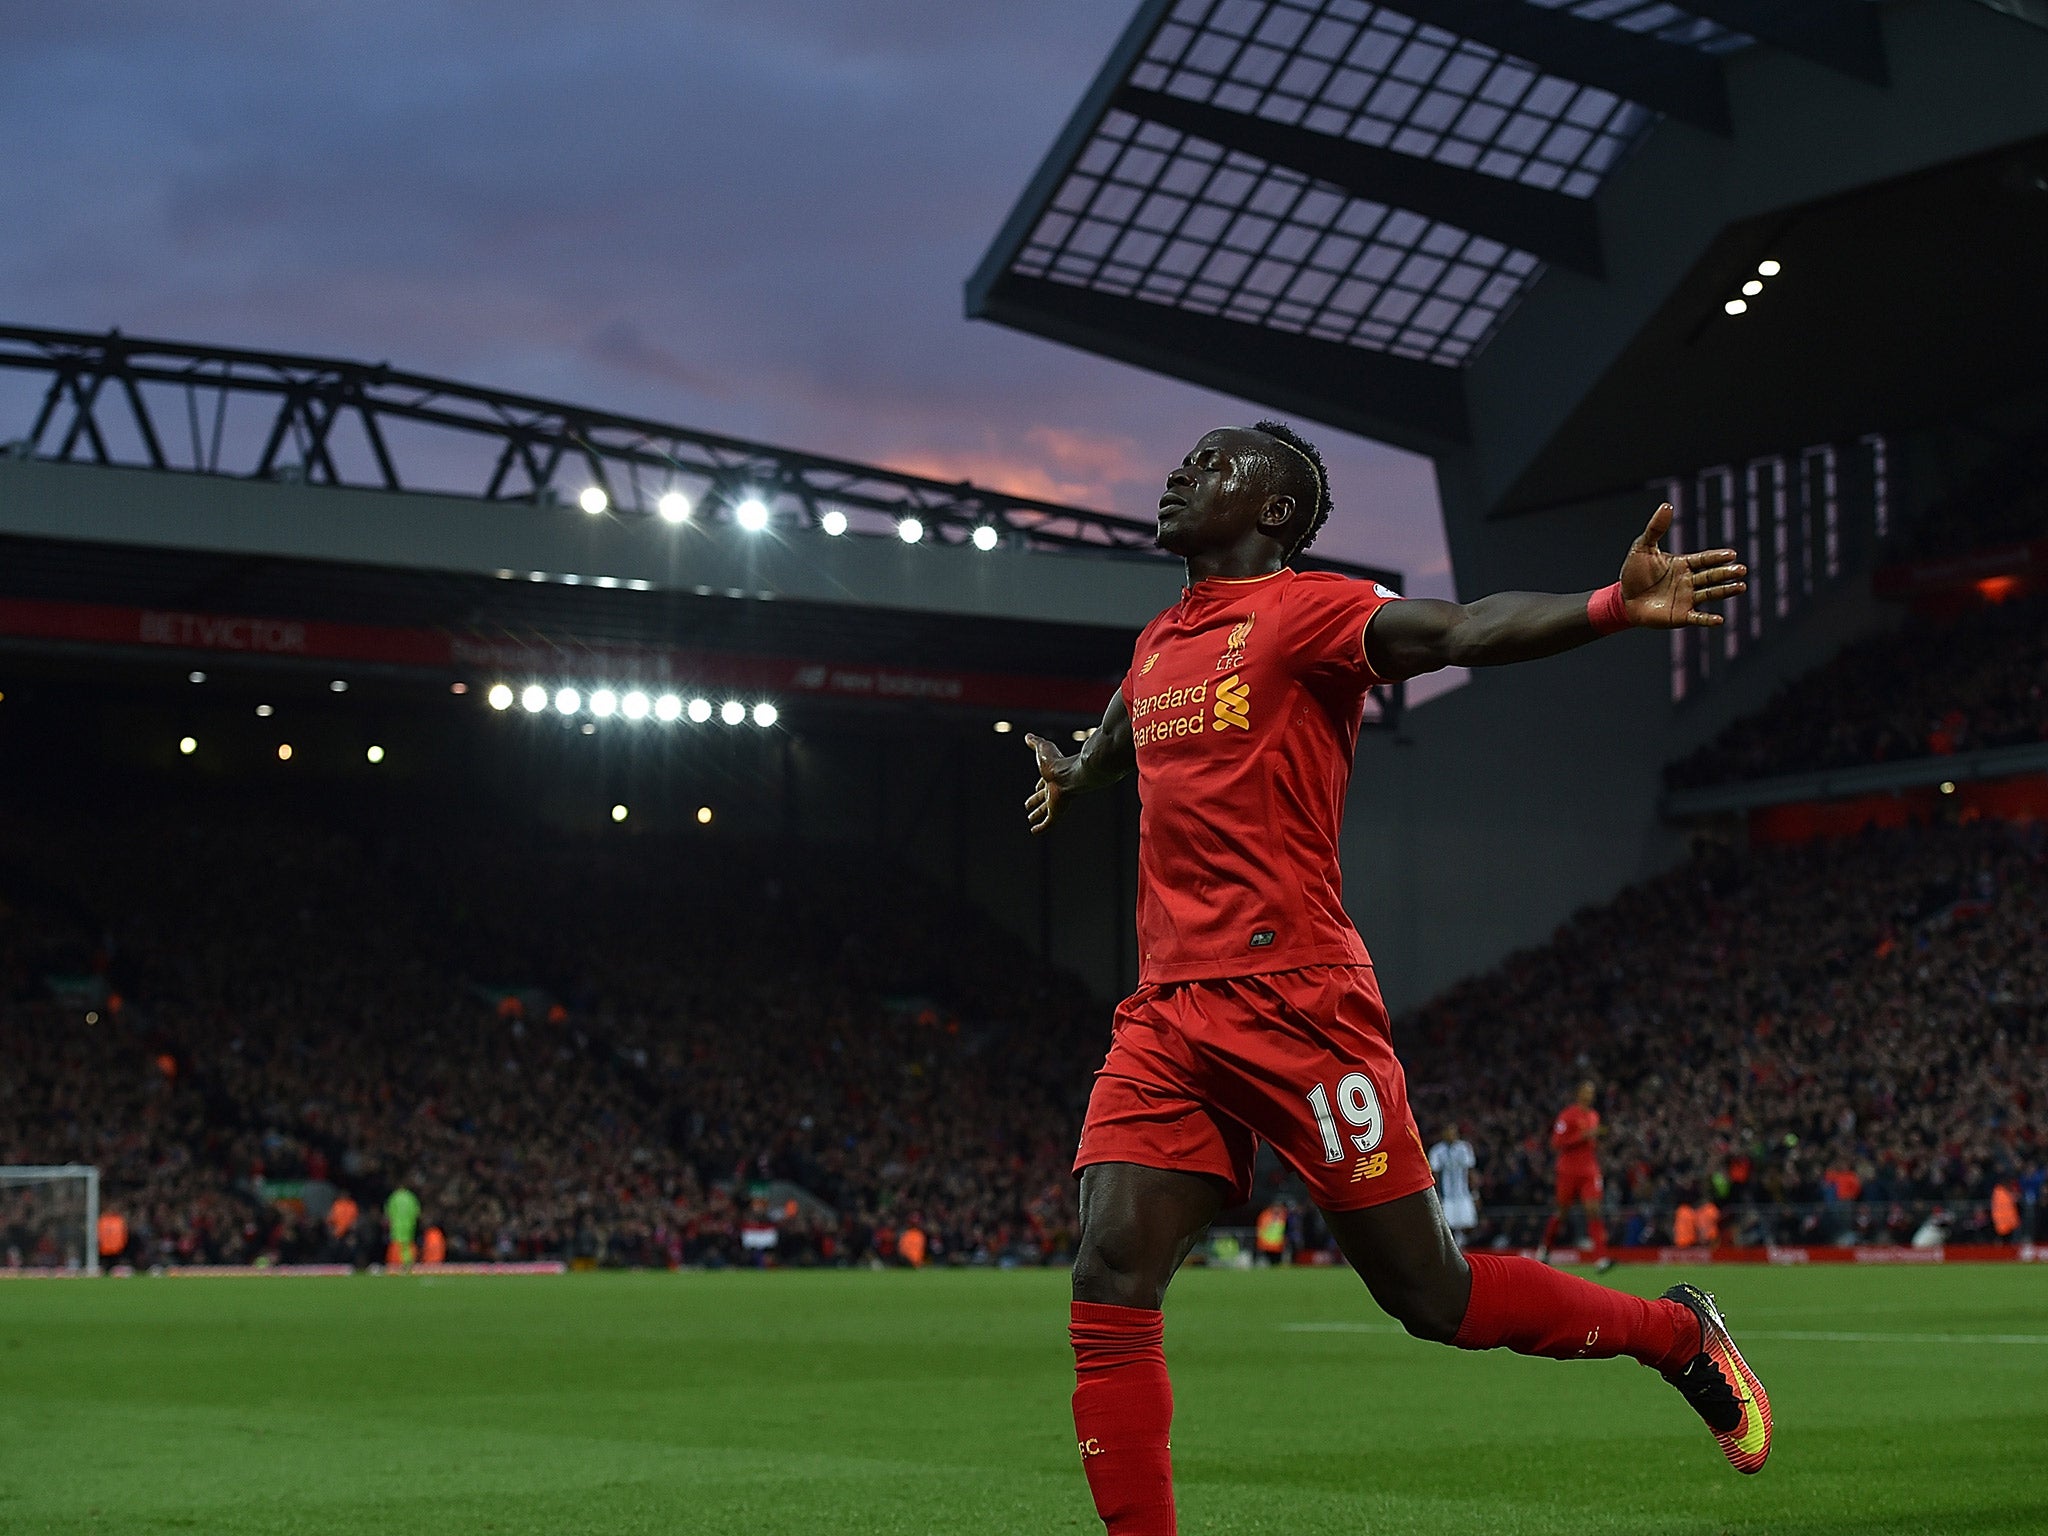 Sadio Mane got Liverpool off to the perfect start as he put them ahead in the first half